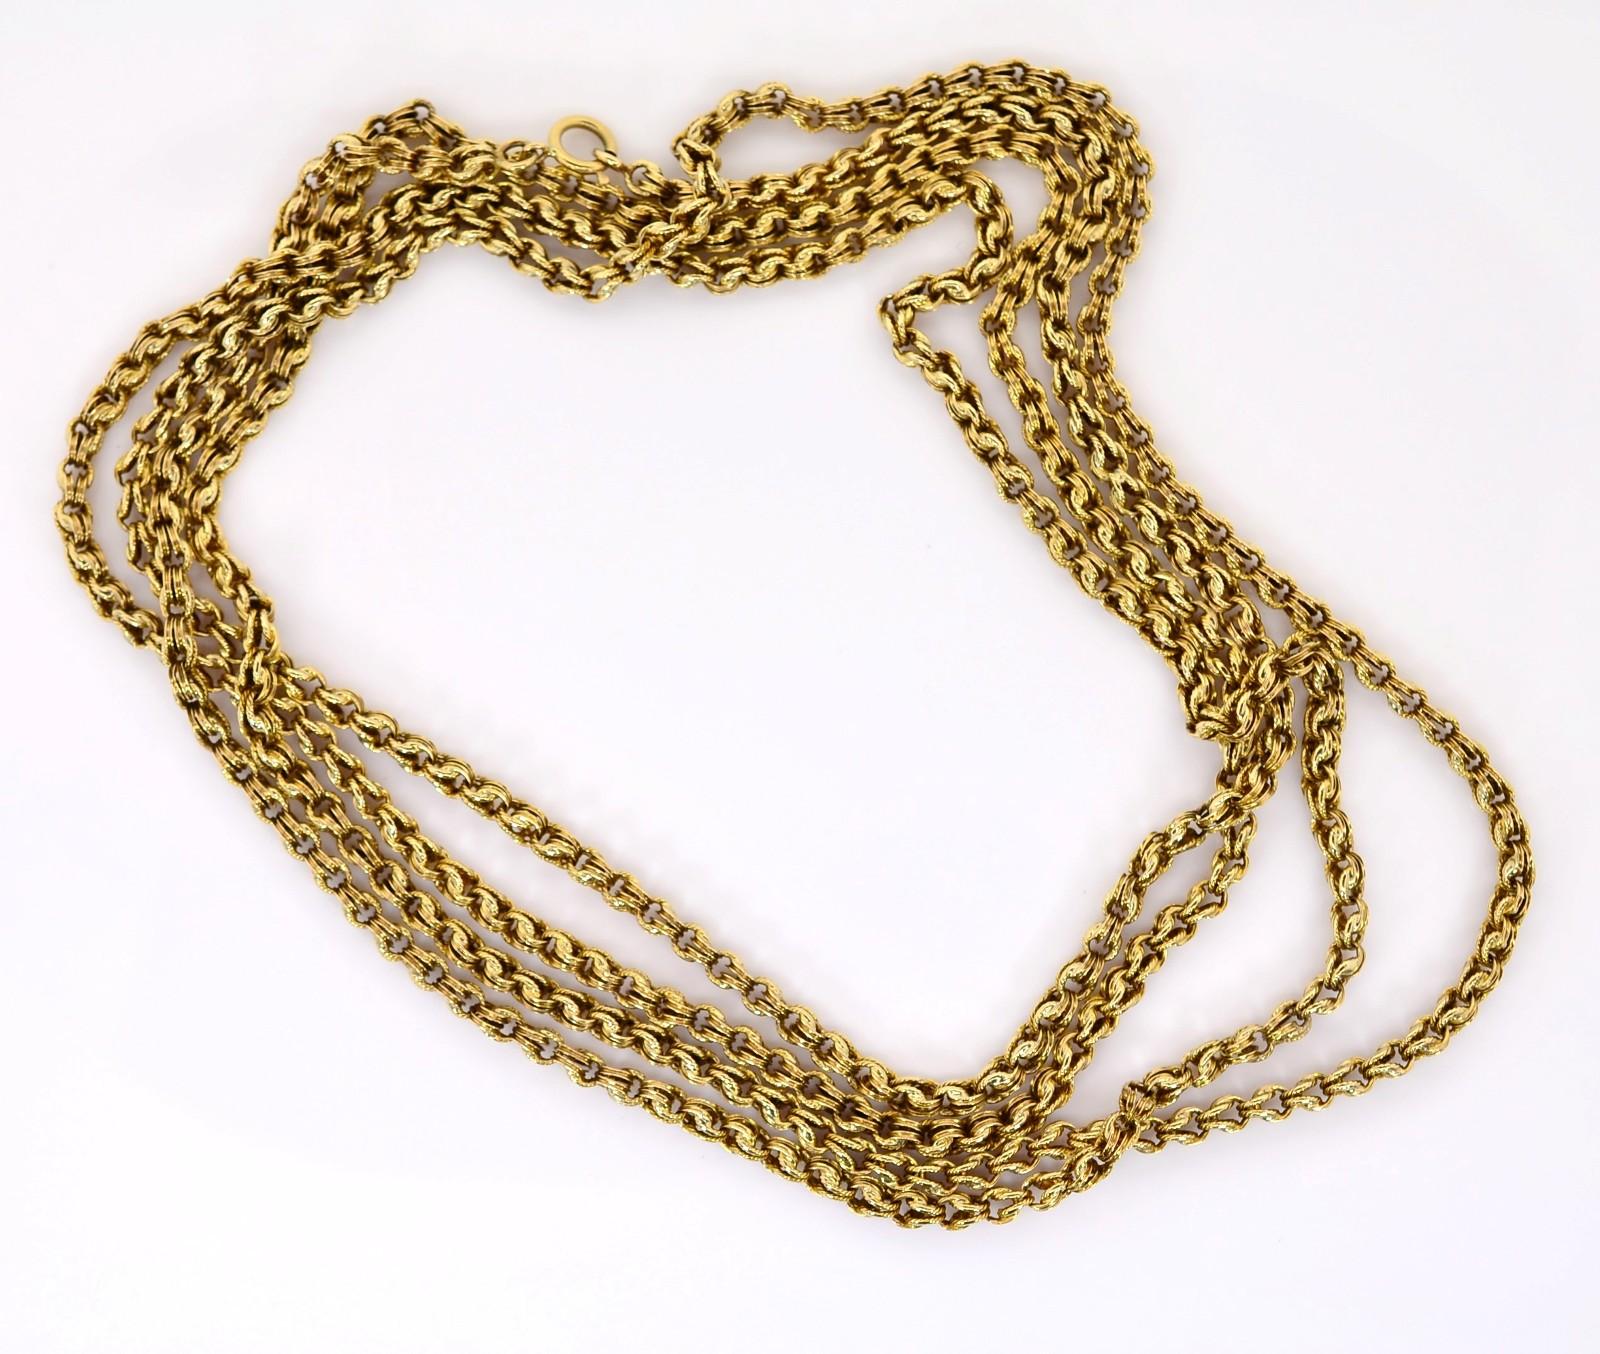 This classic double loop link Victorian chain was created in 14KT yellow gold.   Due to his long length of 55 inches it has the versatility to be worn twice or layered three times around or it could very well be worn around the wrist as a soft